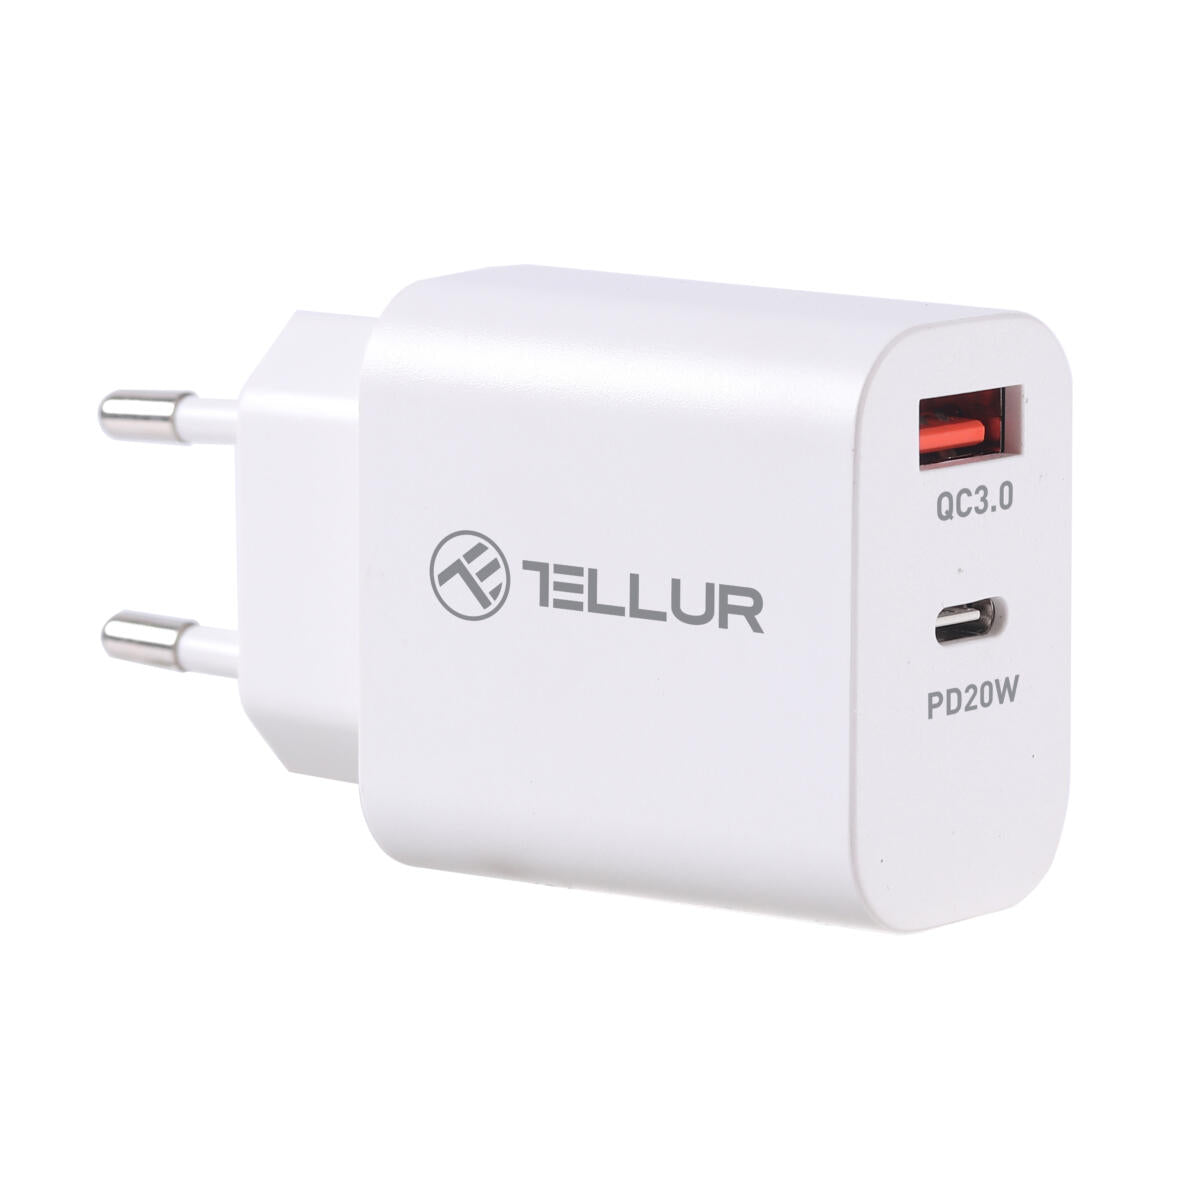 Tellur Dual Port Wall Charger, PD 20W + QC3.0 18W, White